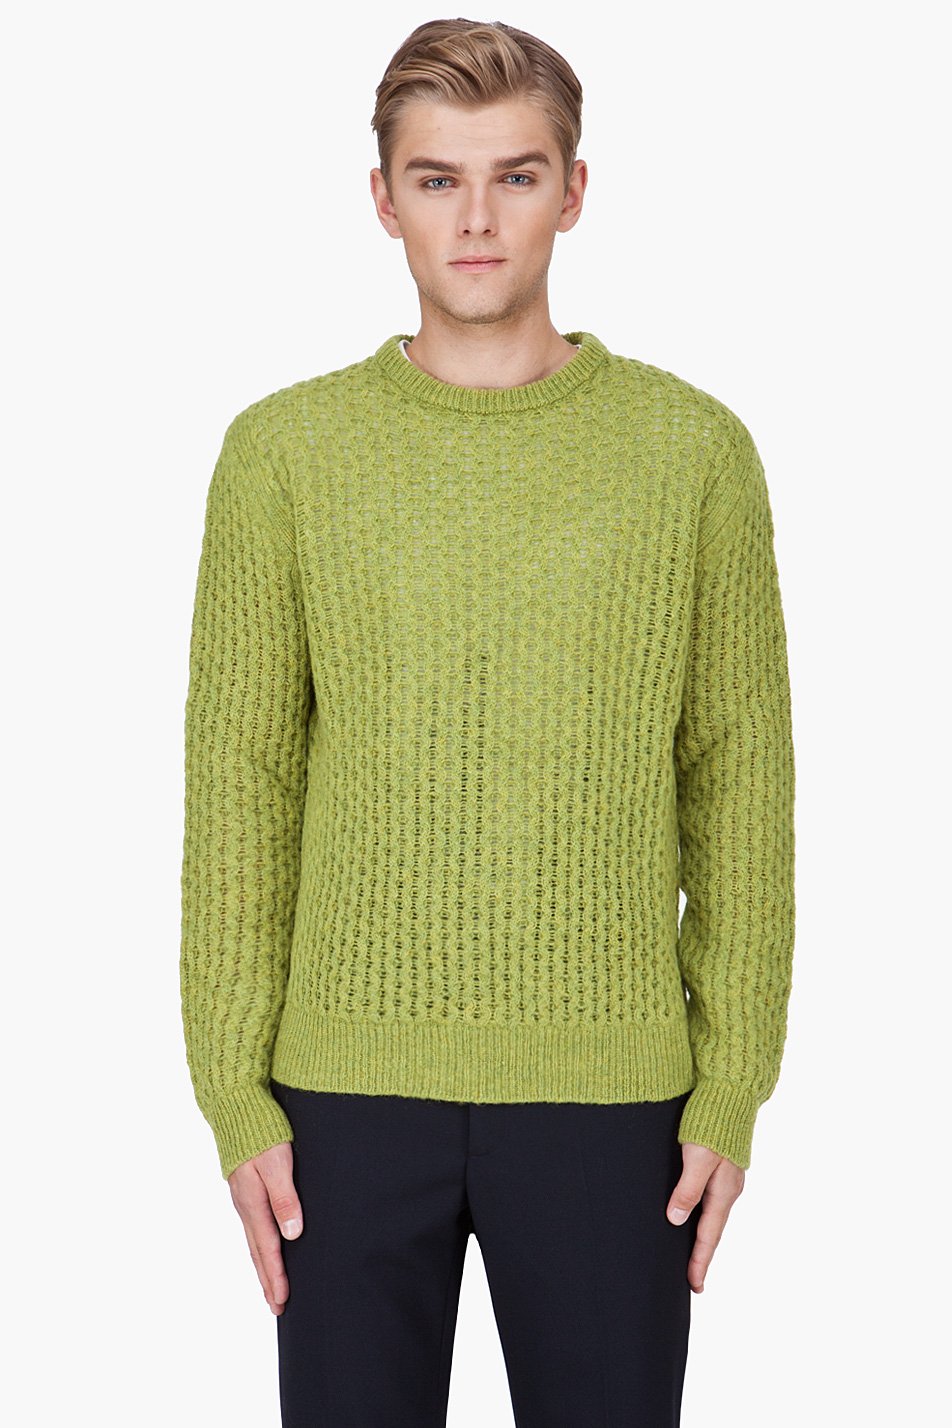 Raf simons Lime Green Wool Knit Sweater in Green for Men | Lyst